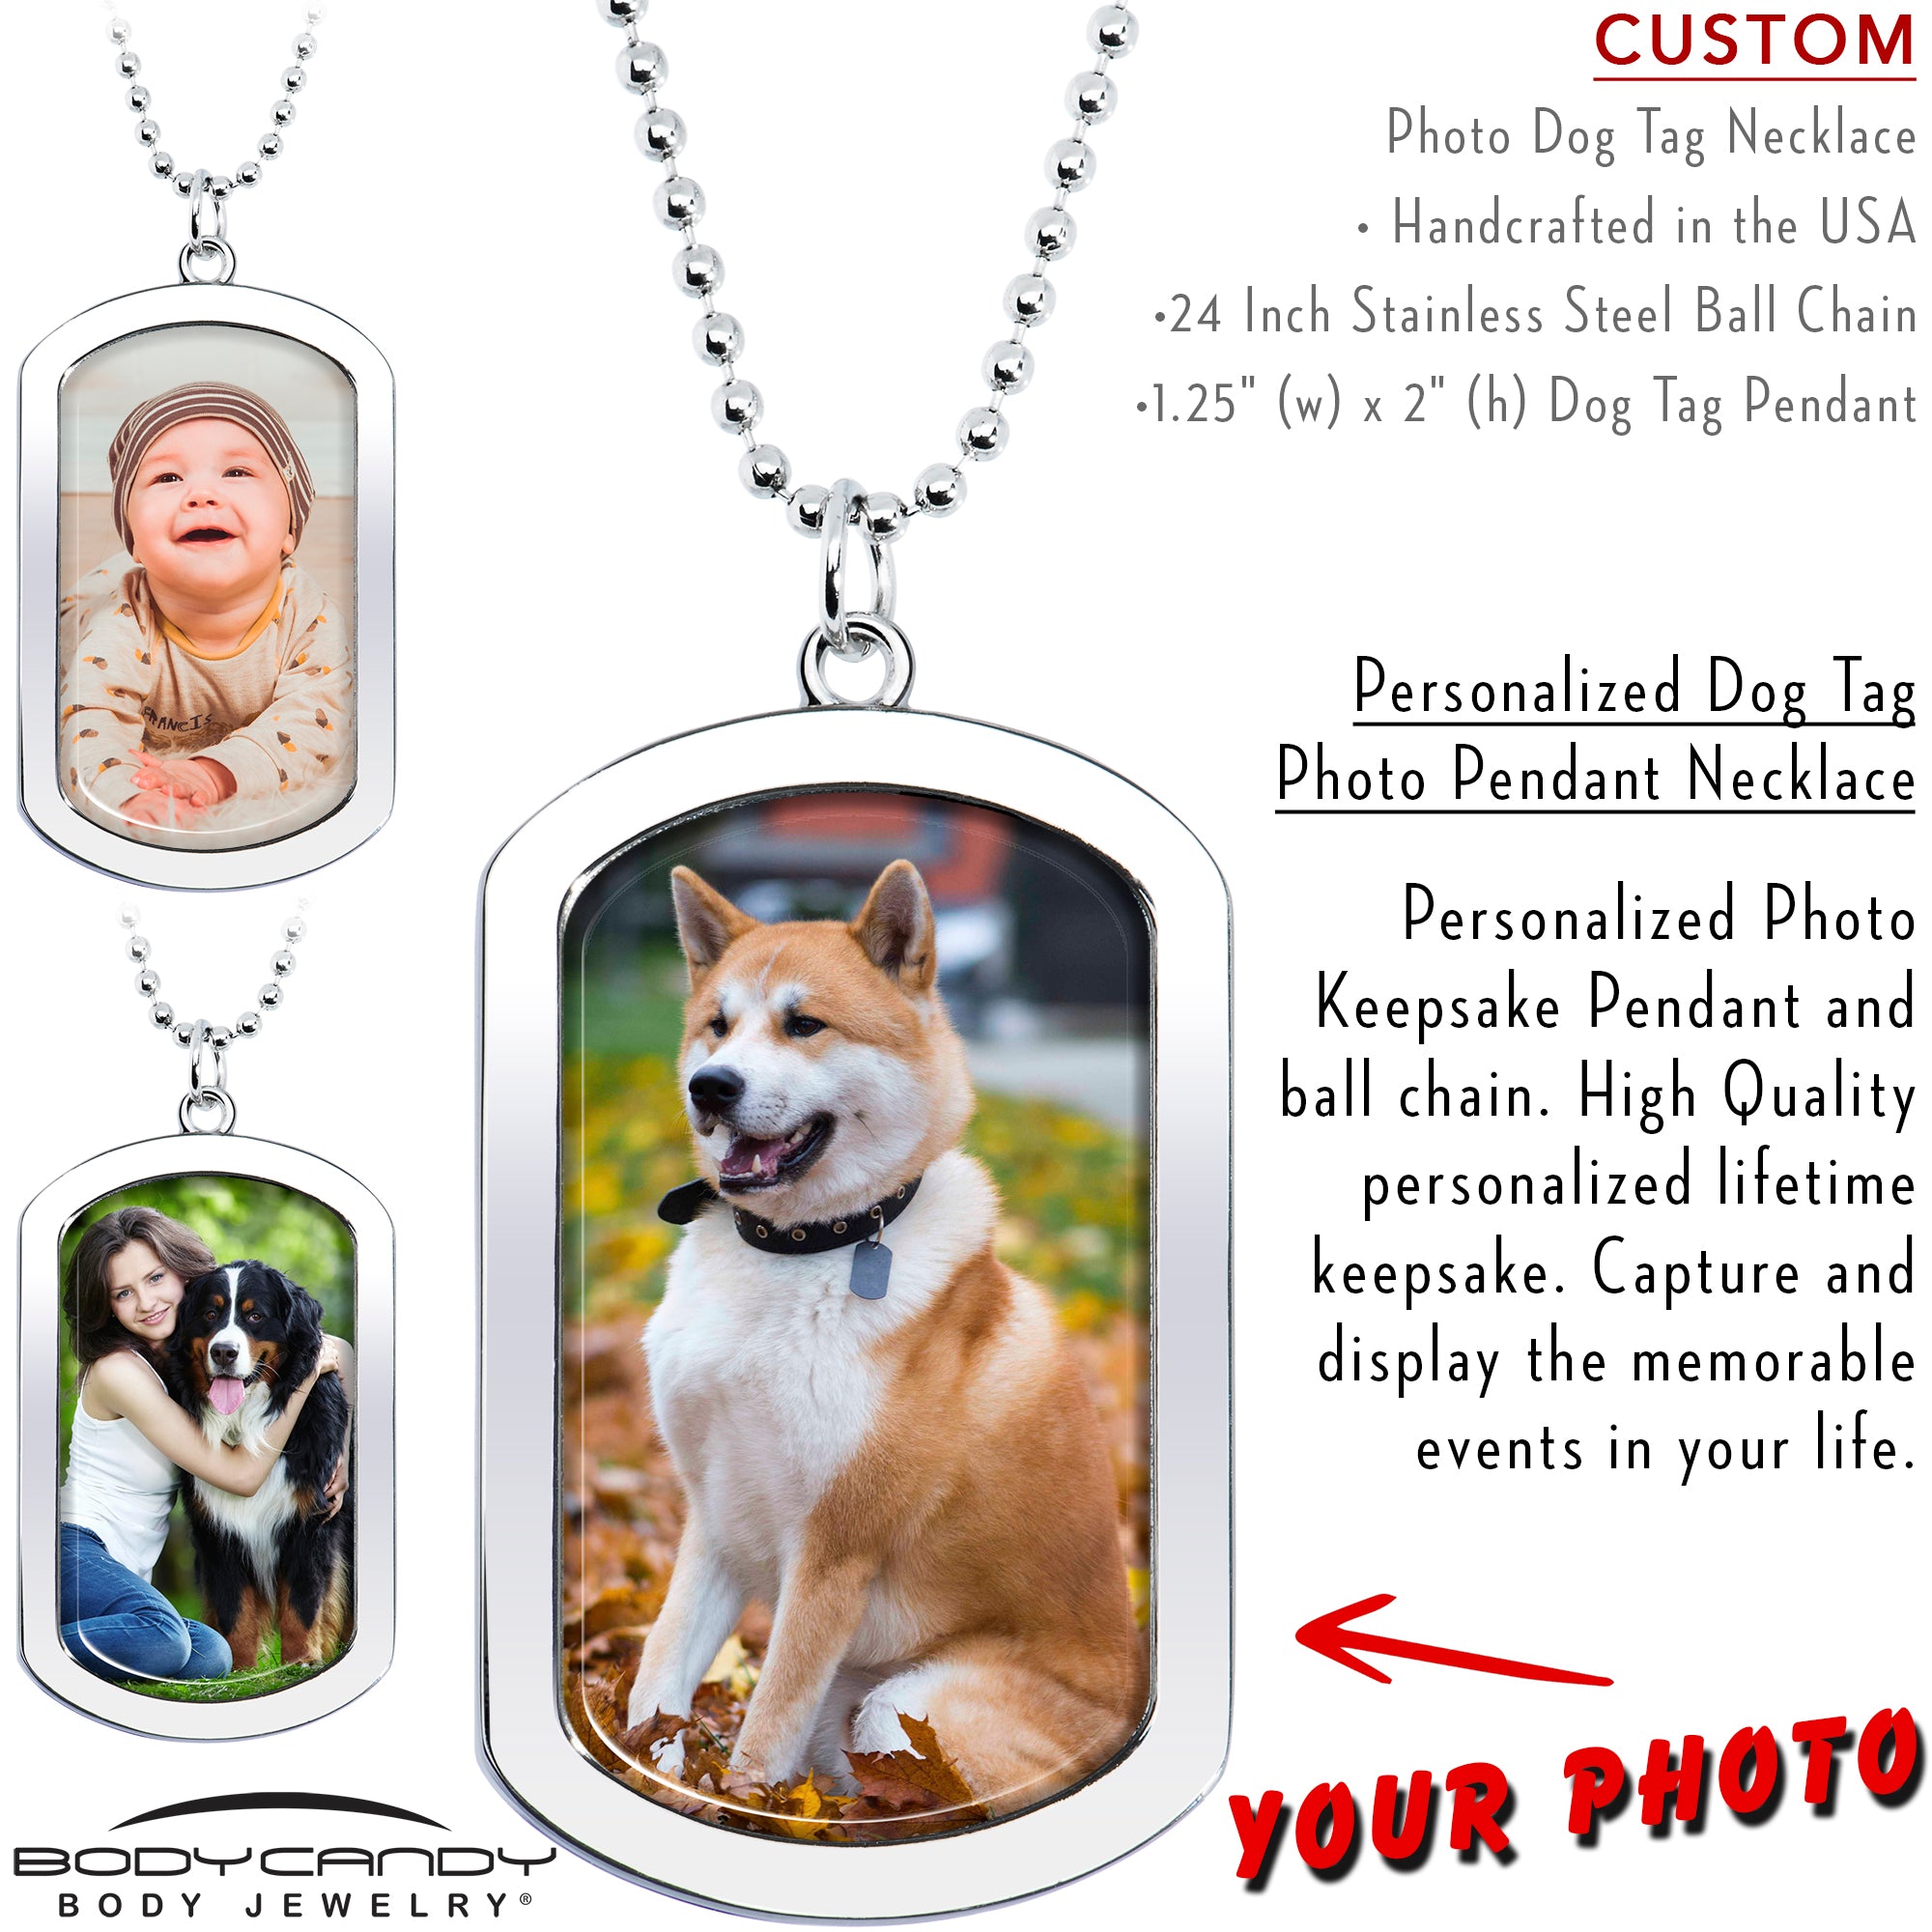 Personalized Dog Tag Photo Pendant Necklace